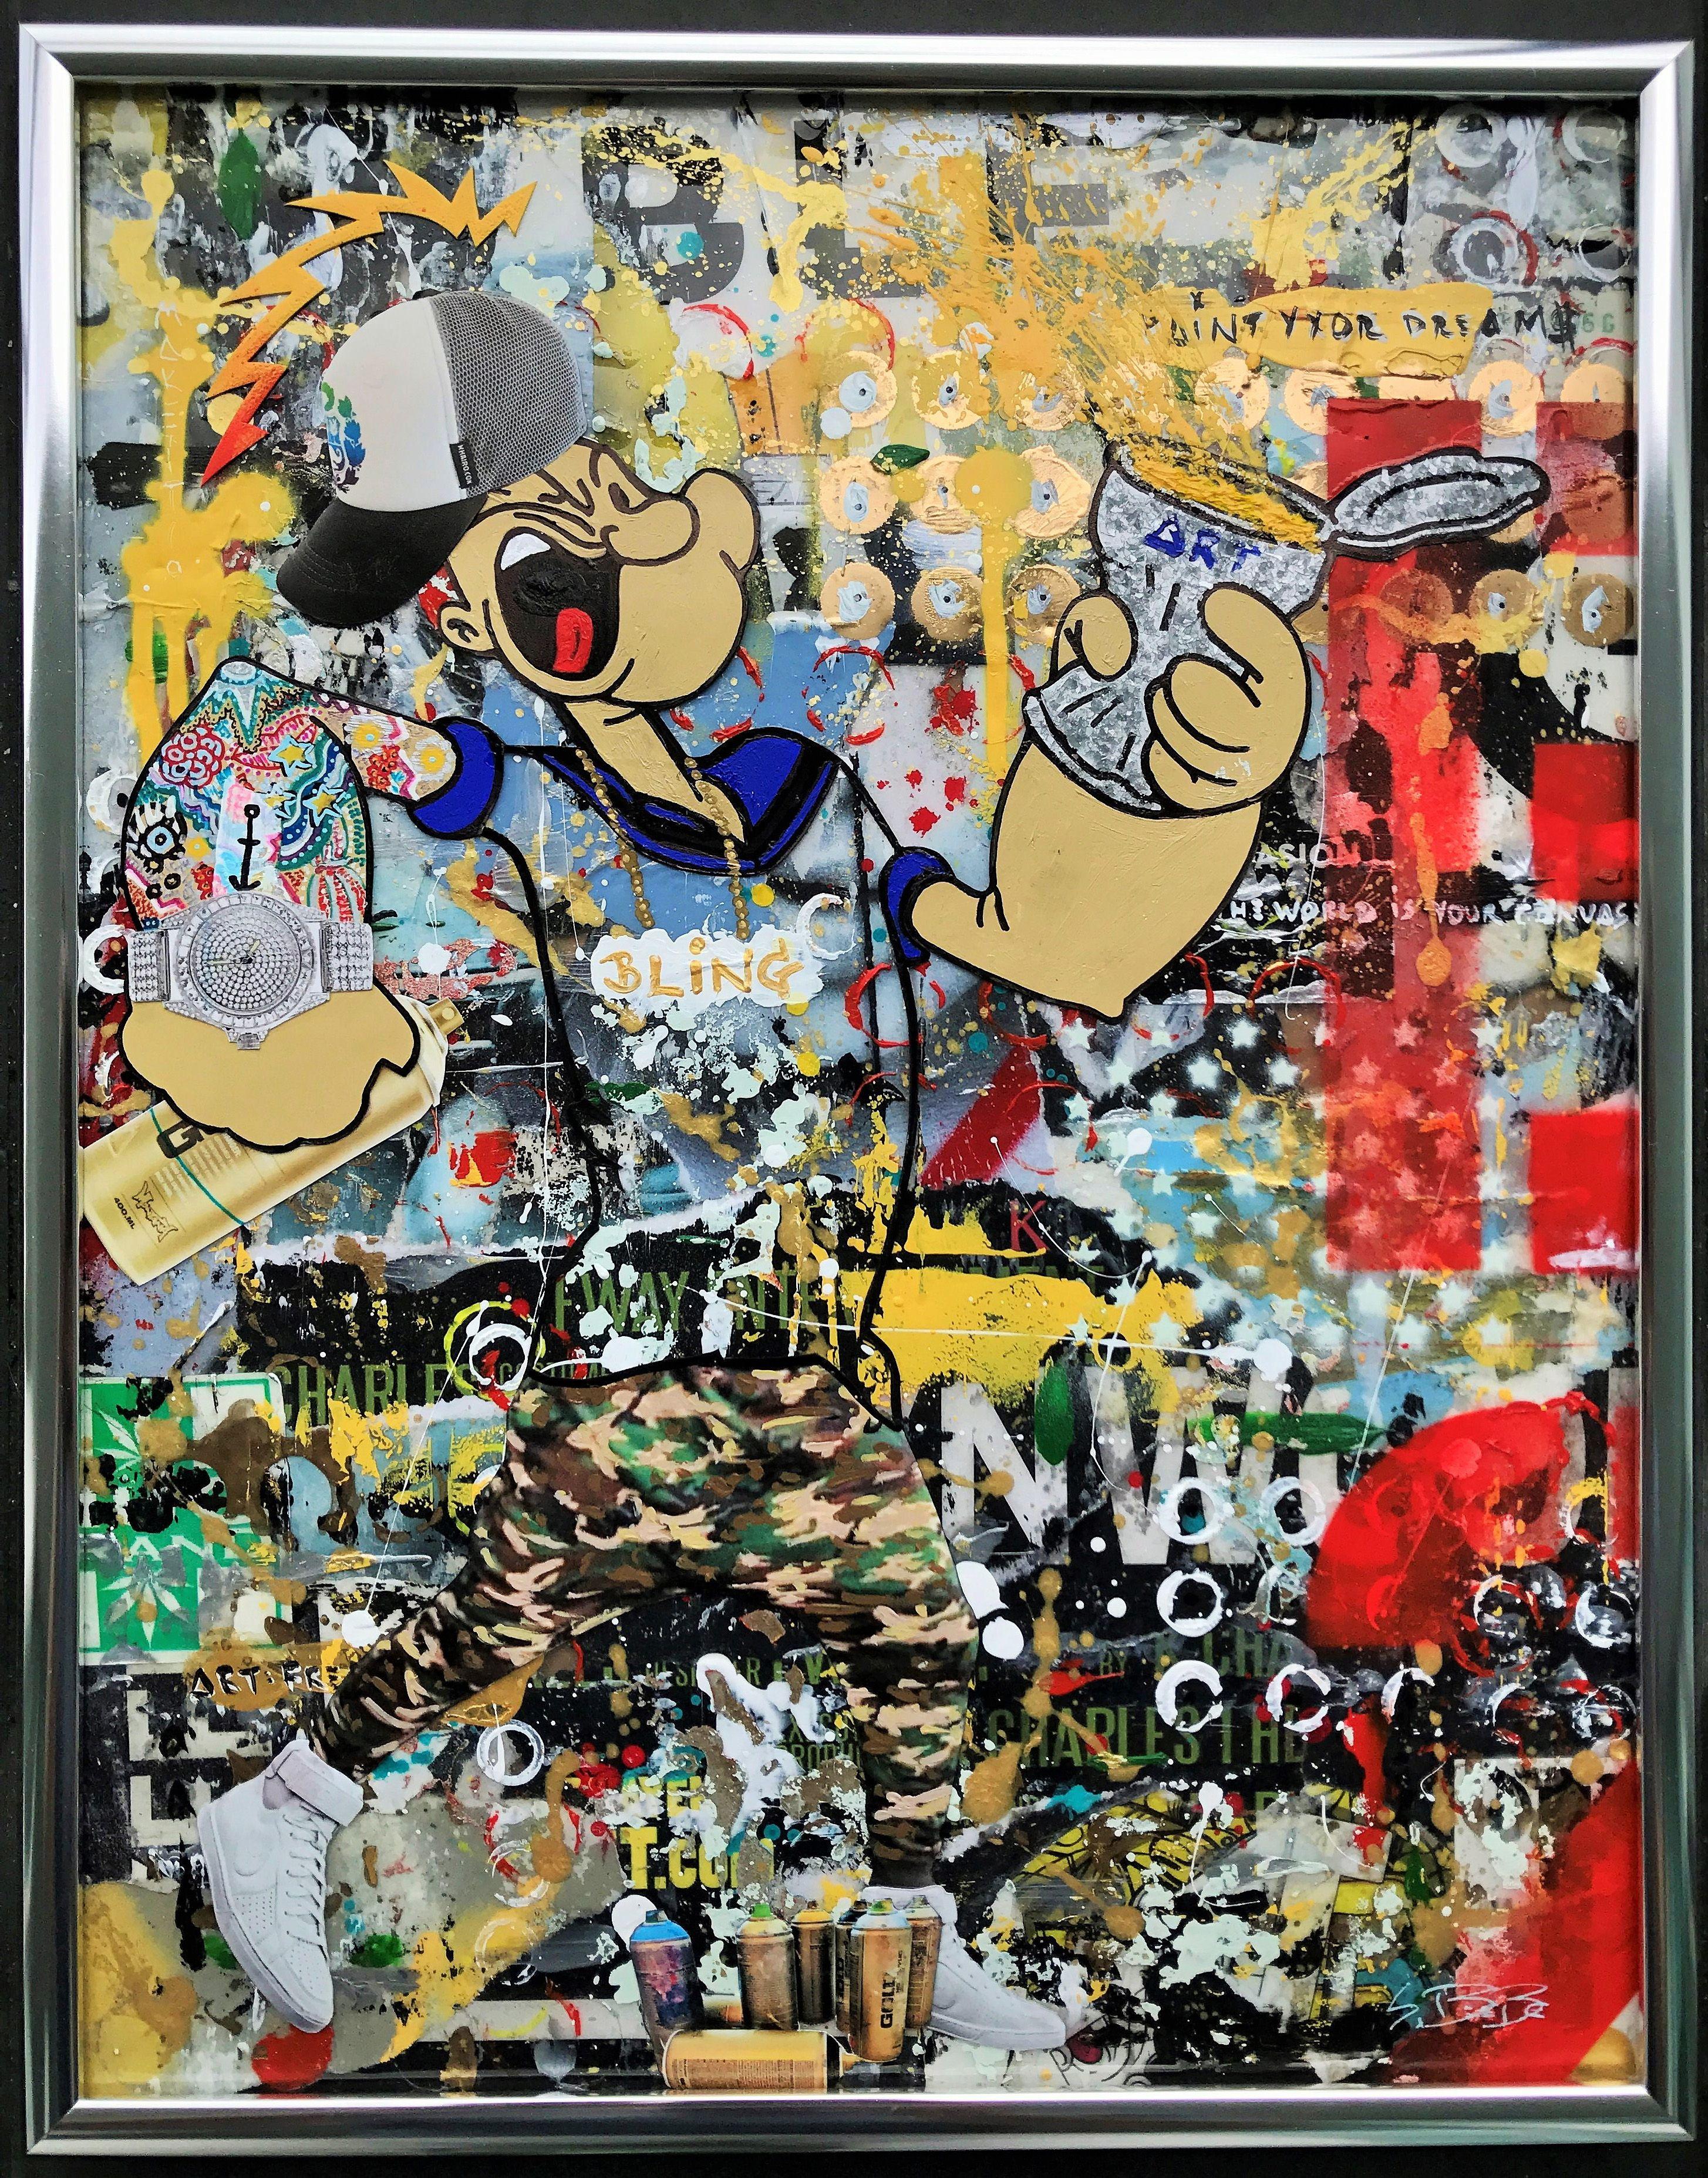 Paint the Wallz - Wynwood Series, Mixed Media on Other - Pop Art Mixed Media Art by Greg Beebe